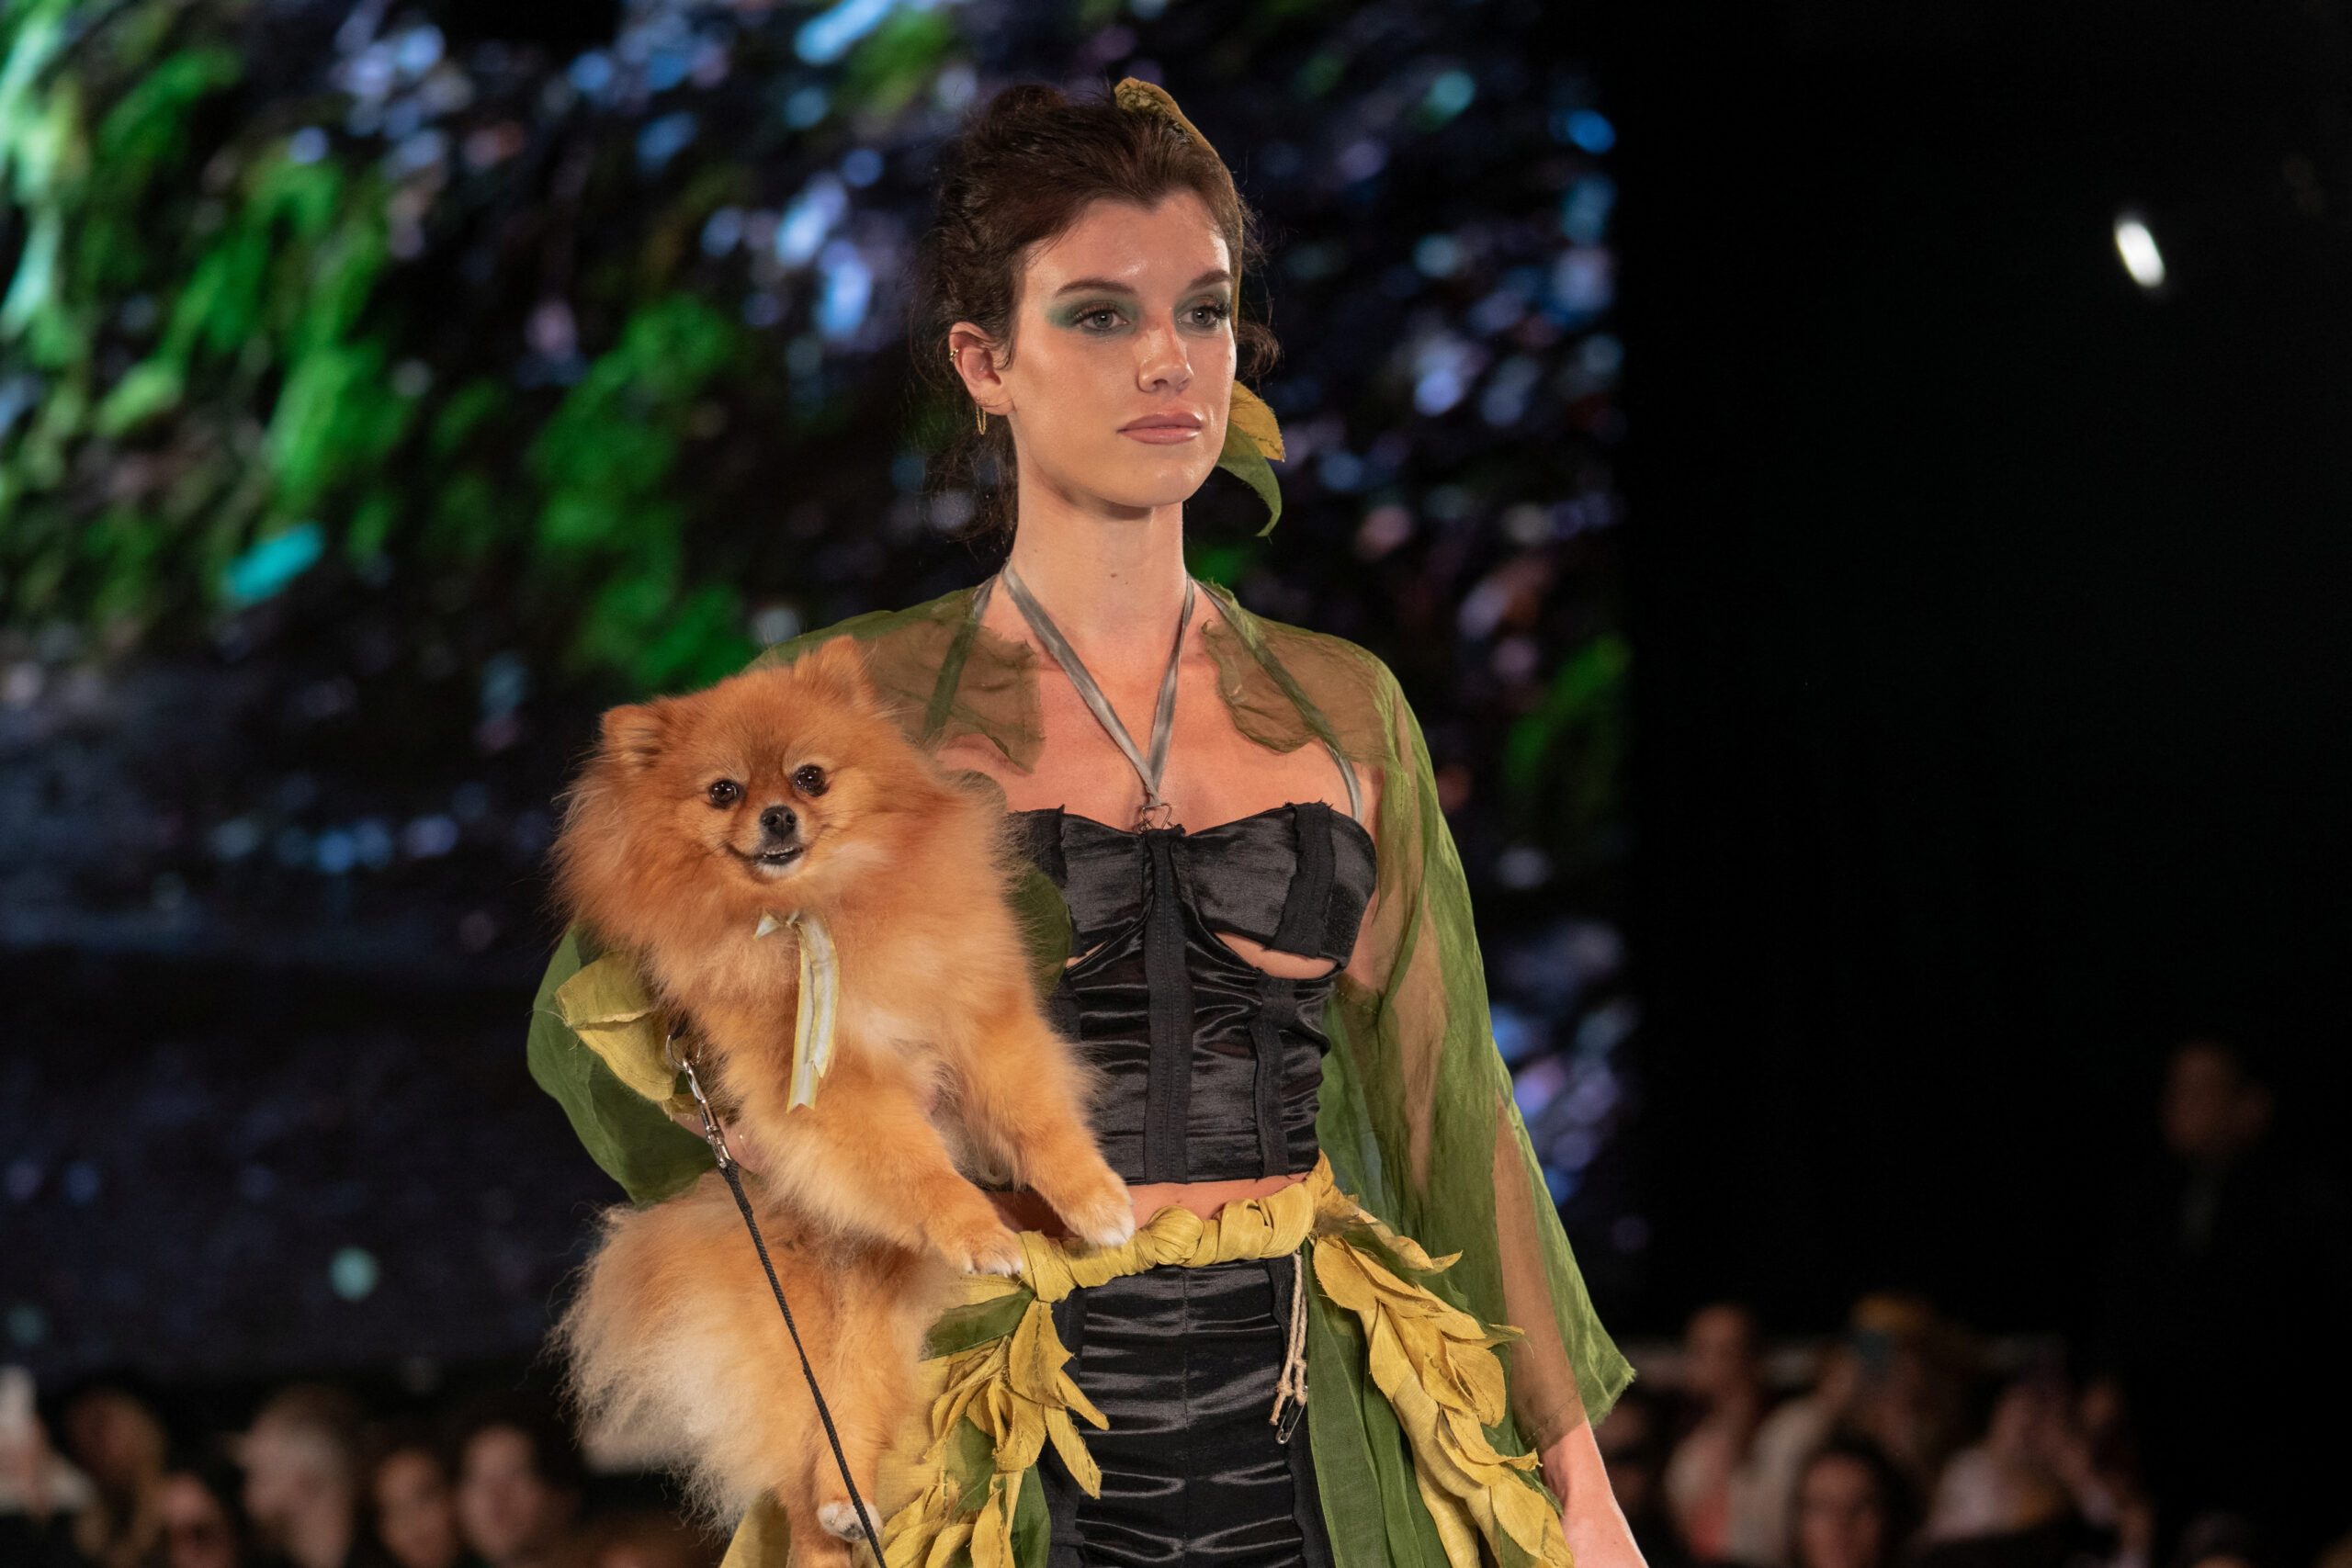 The Looks Of The Coppell Art Center's Dog Fashion Show.